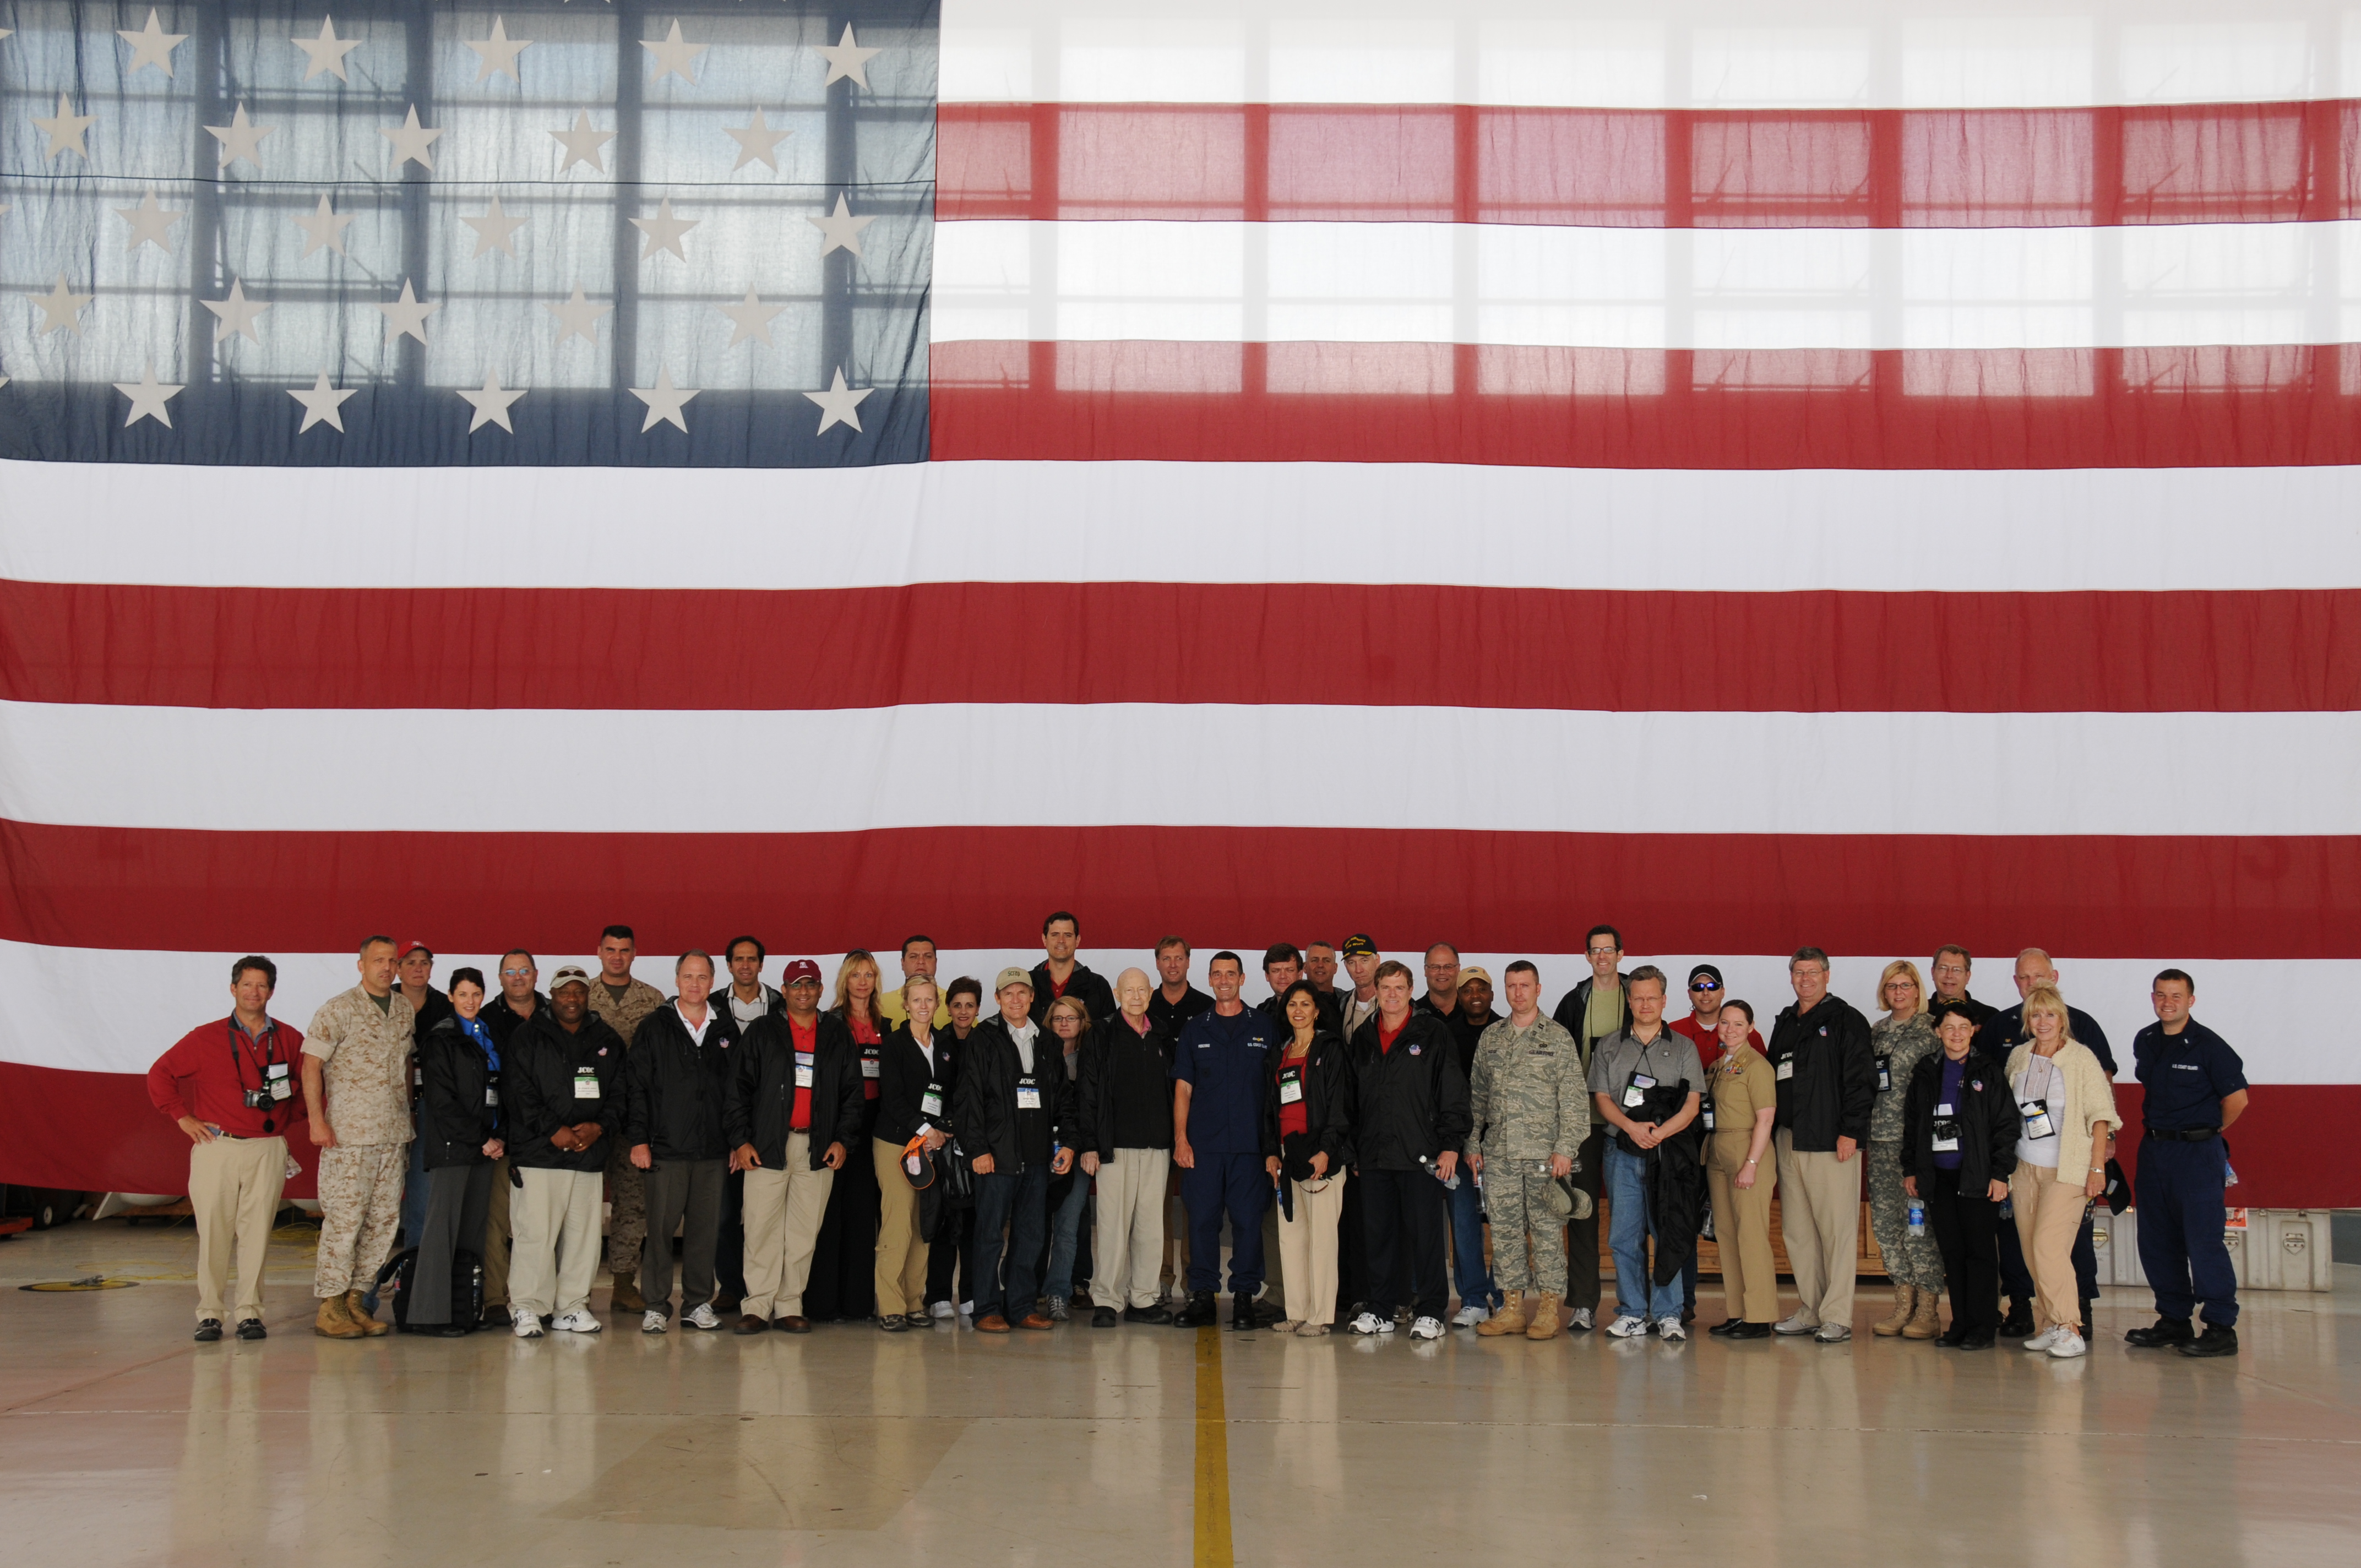 Members of JCOC77 pose for a picture with Vice Admiral David Pekoske, Pacific Area Commander, in a Coast Guard hanger in San Diego, CA.